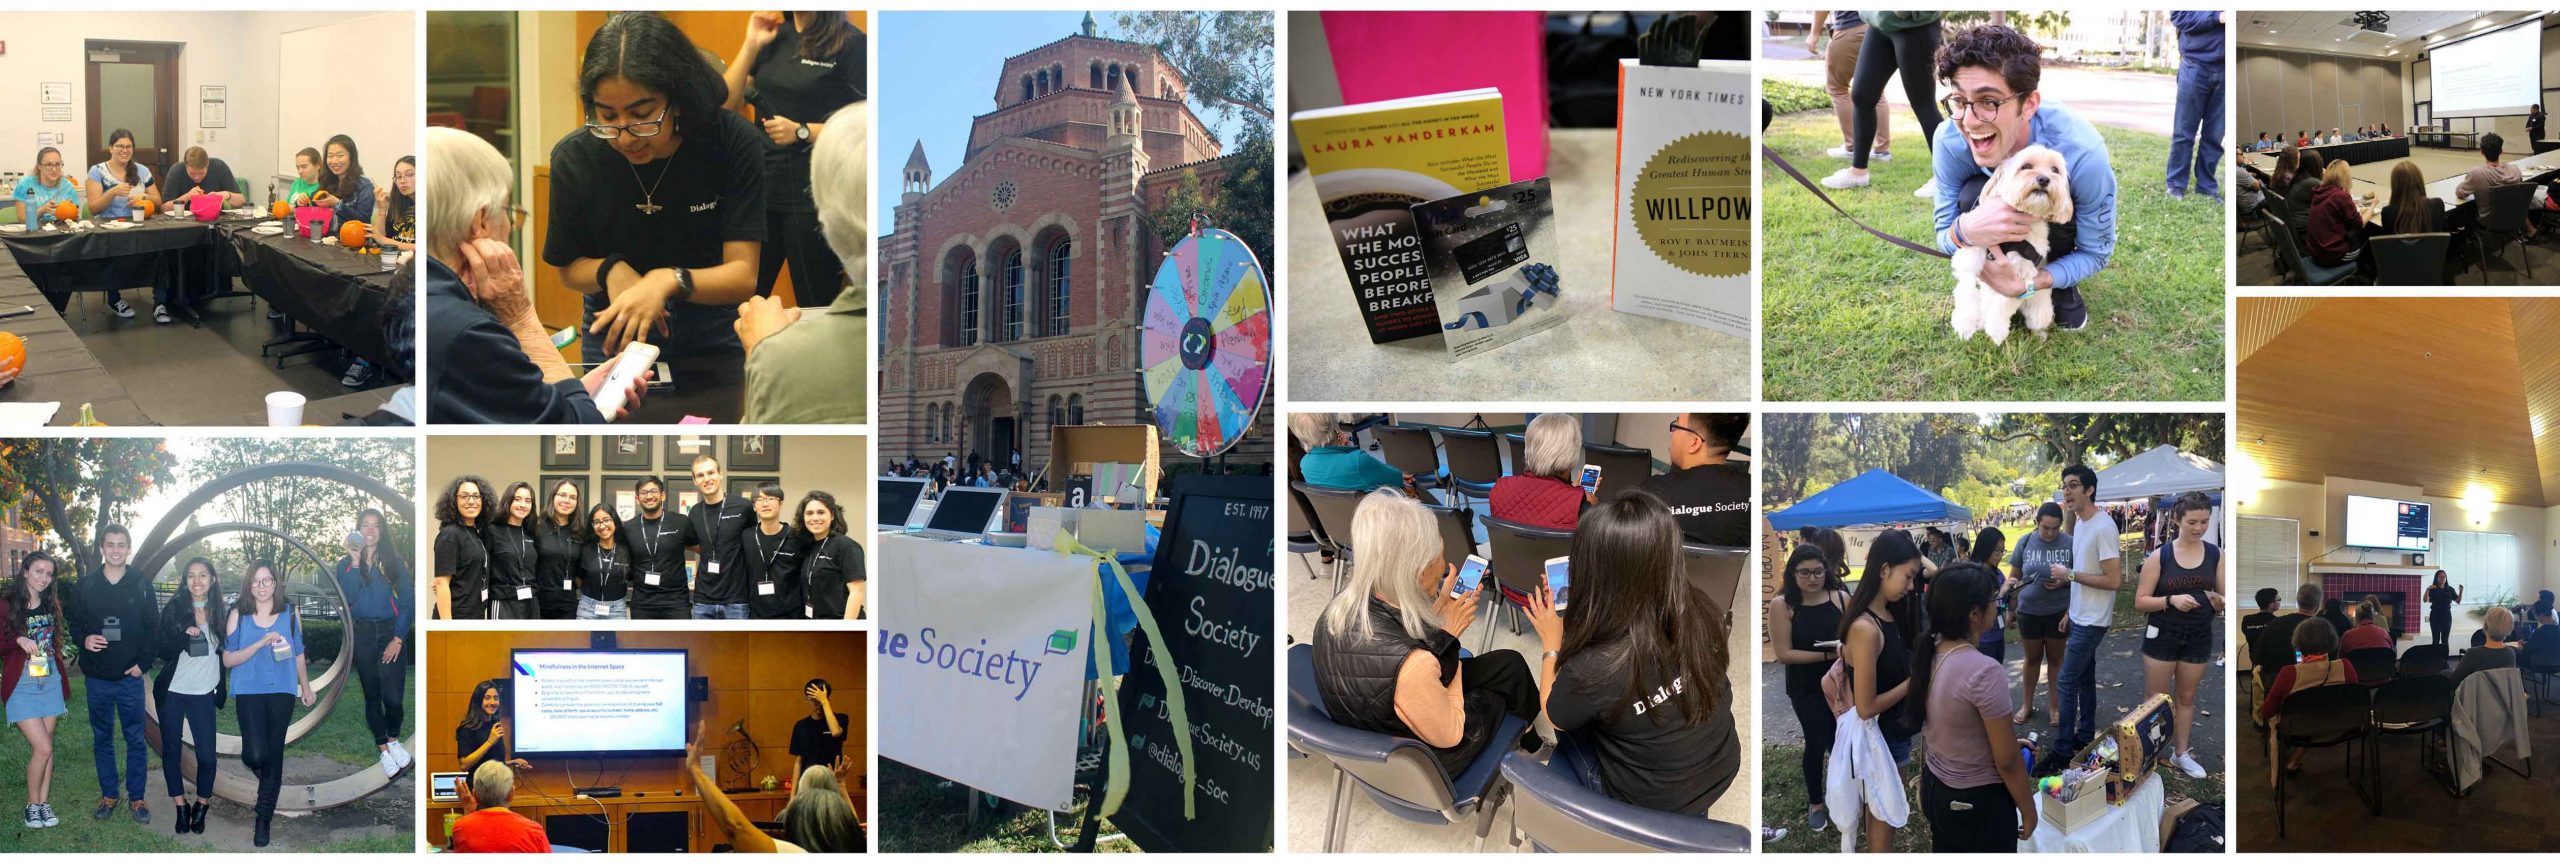 A selection of photos depicting various activities of the two chapters of the Dialogue Society student clubs at UCLA and UCI.